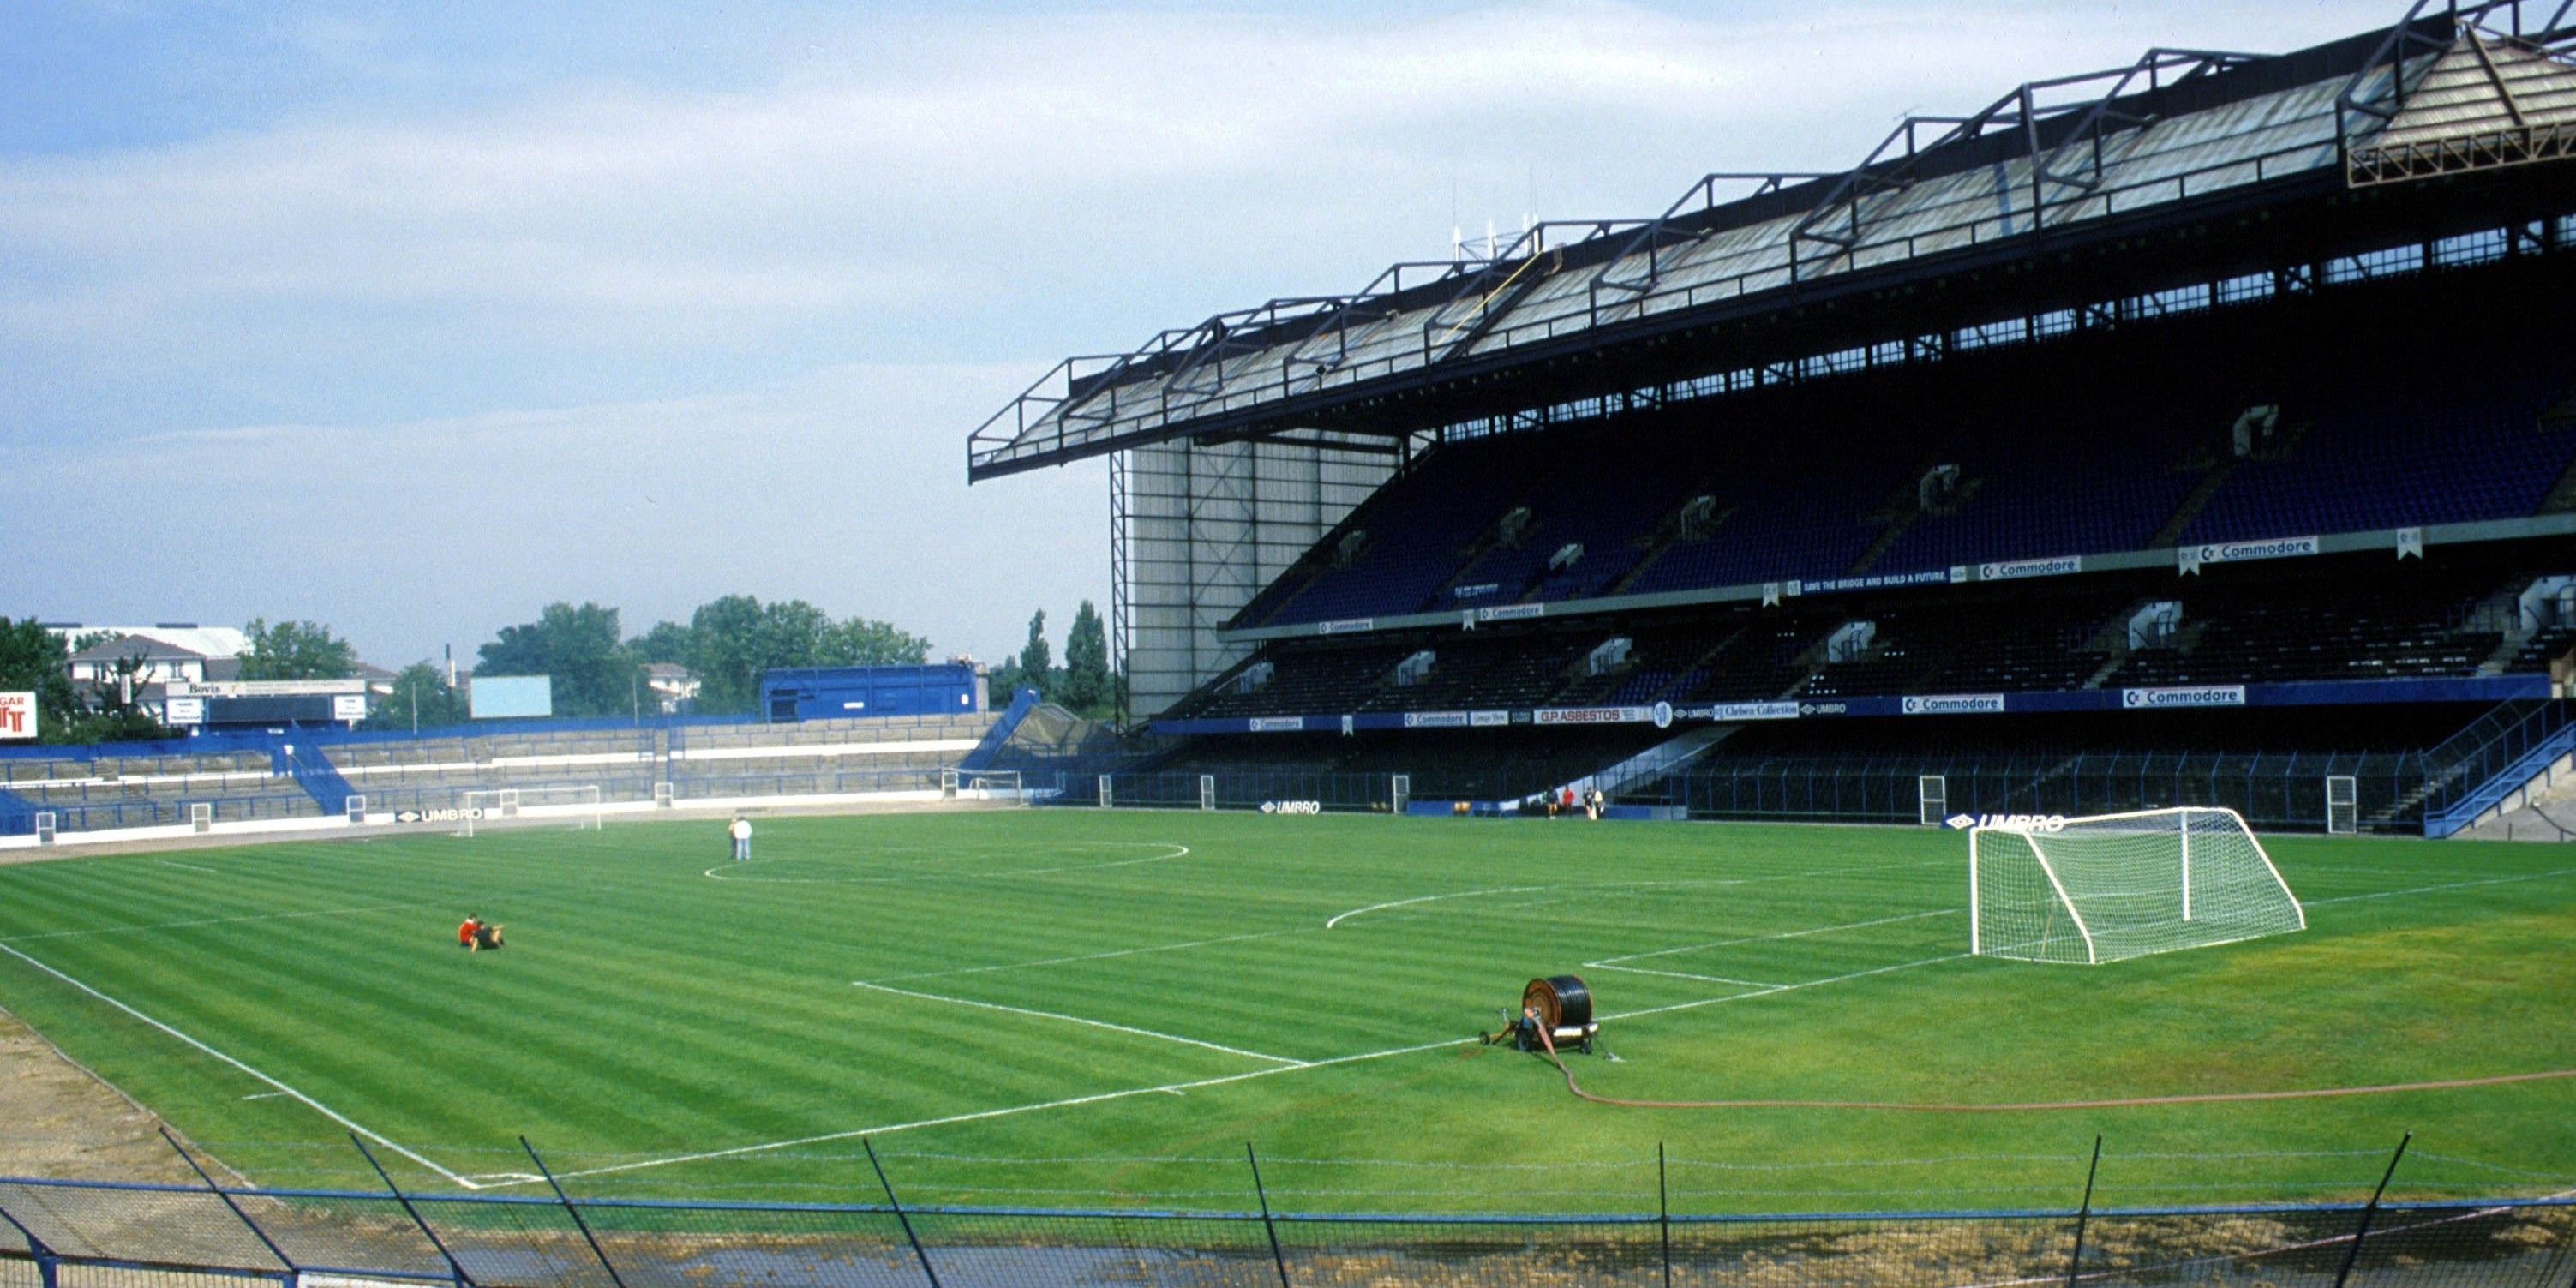 East stand